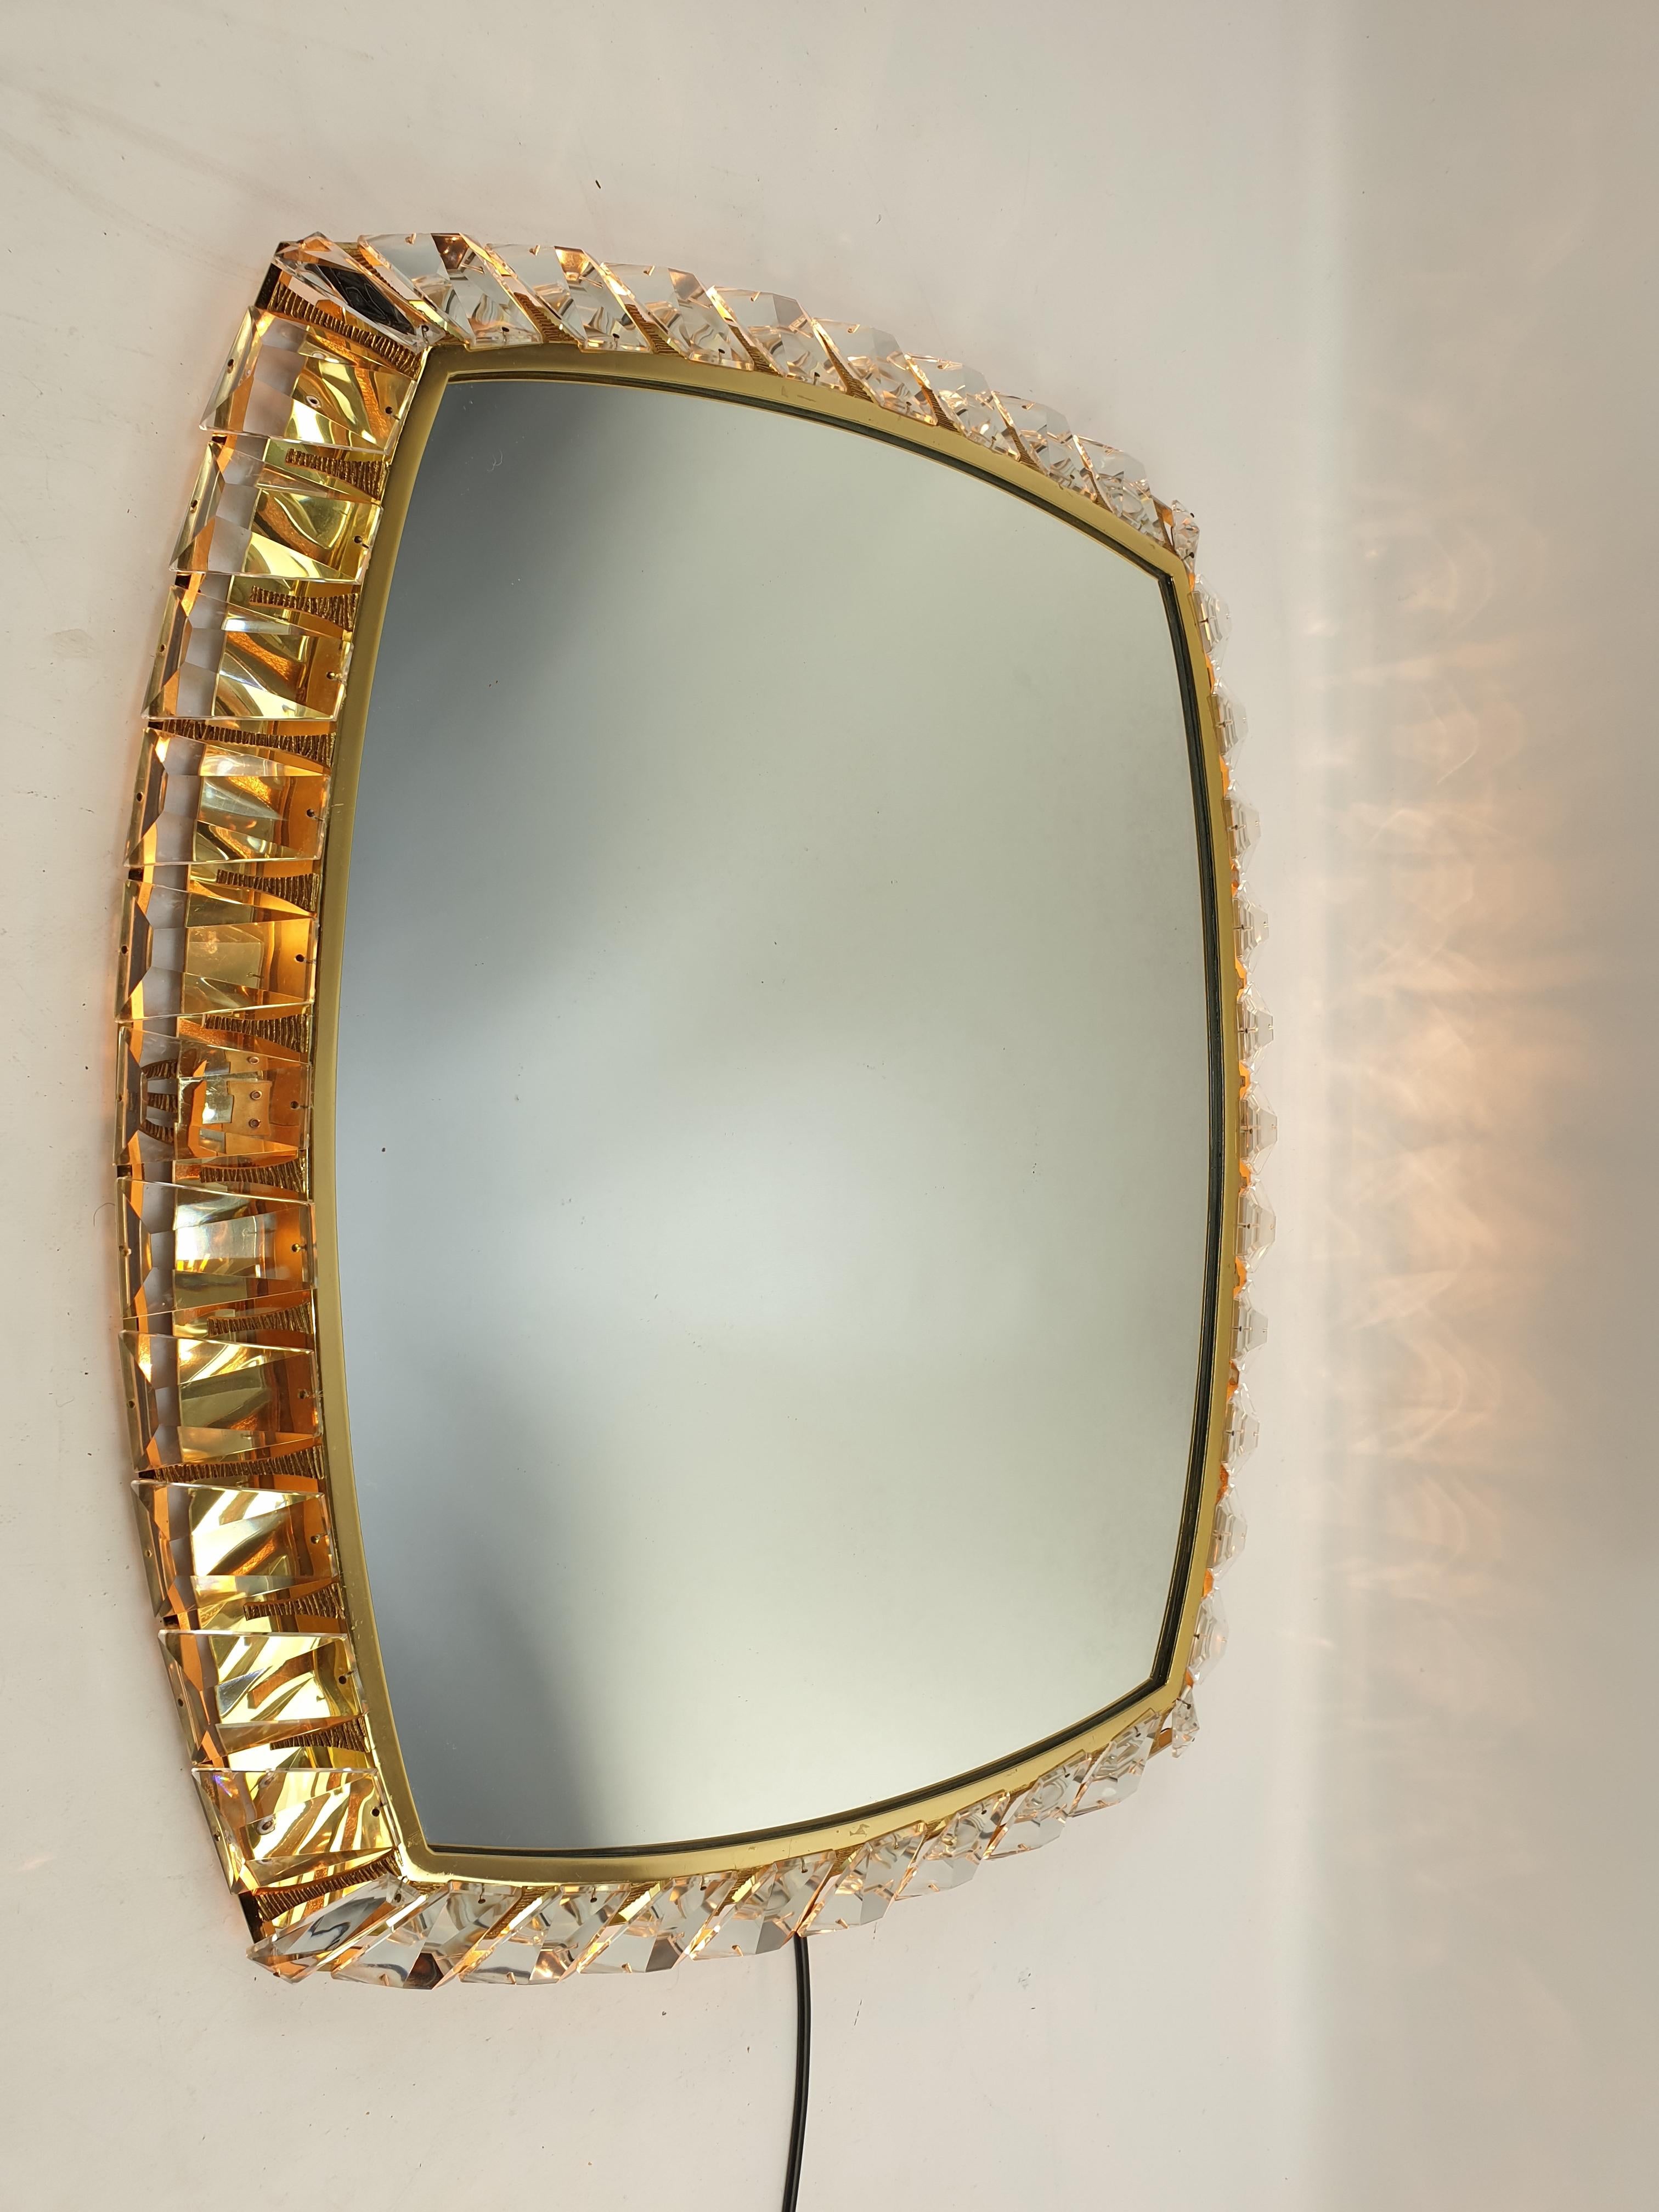 This is a real luxury wall mirror with many big size shiny crystals around the brass mirror frame. The mirror can be illuminated from inside and creates a gorgeous brilliant light. In reality the lamp has a more golden shine than is seen in the